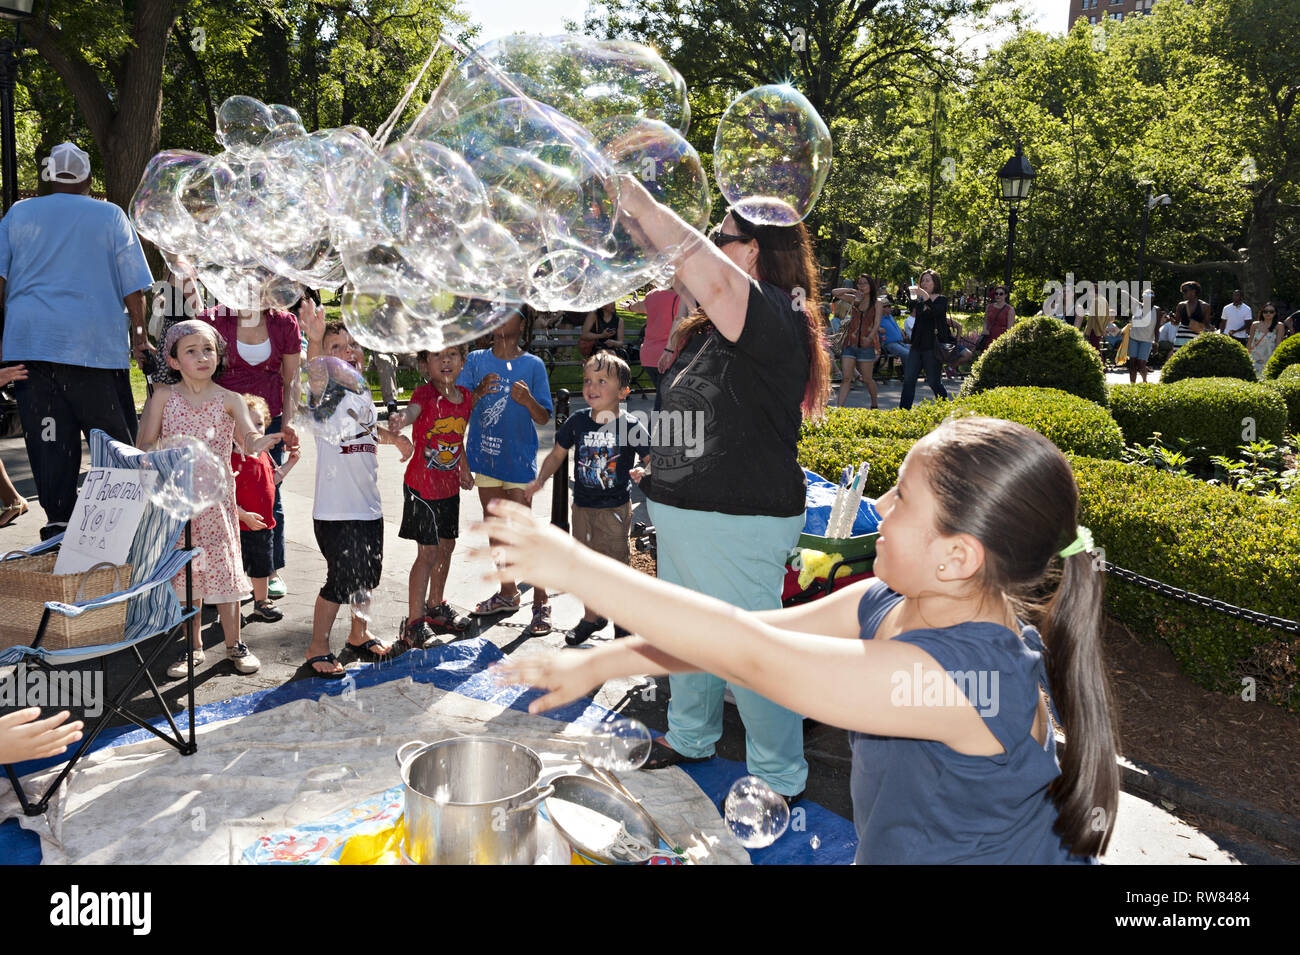 Children excited and delighted by big bubbles in Washington Square Park in NYC, 20014. Stock Photo